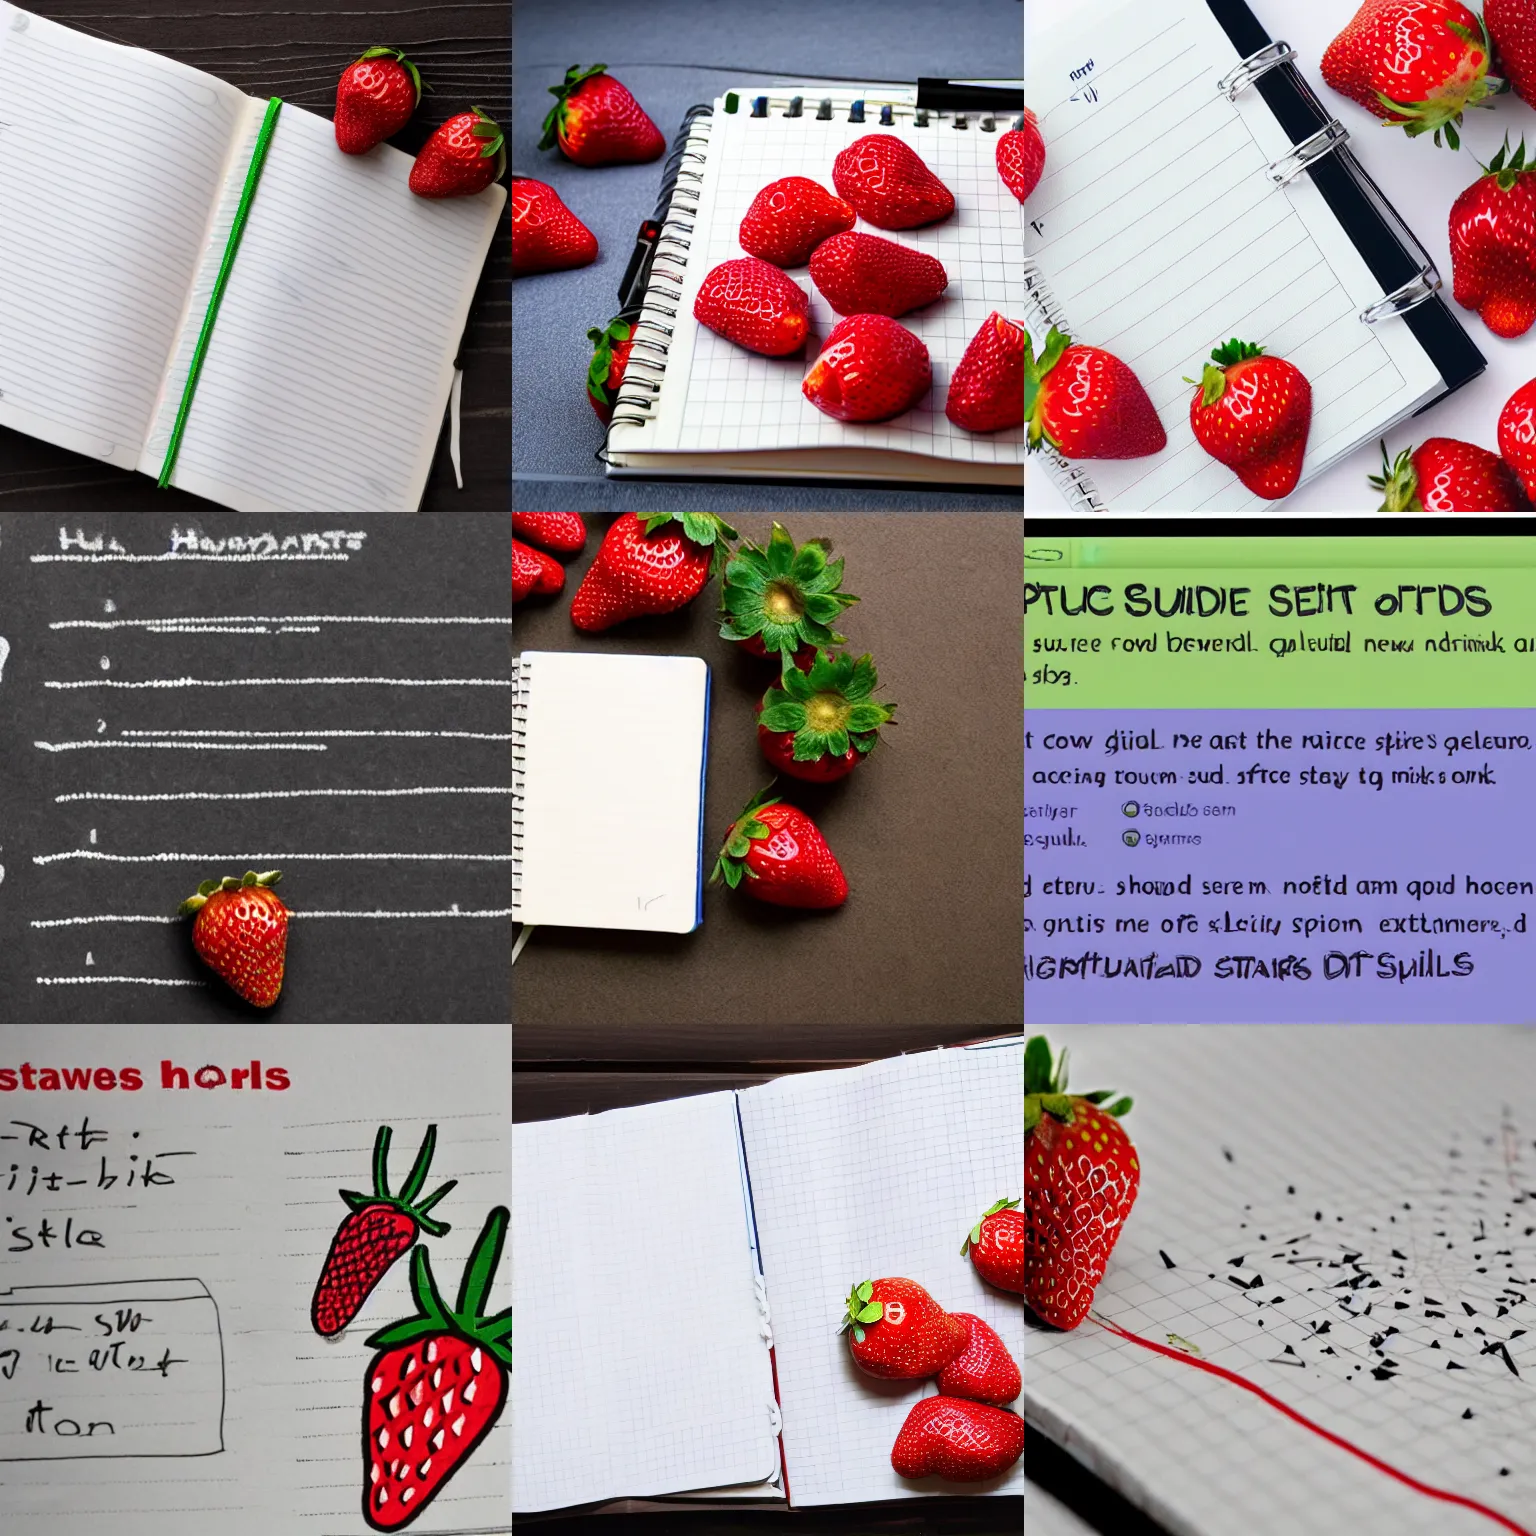 Prompt: extremely detailed guide written in a notebook on how to add harmful spikes to soft objects such as strawberries, found written in a notebook